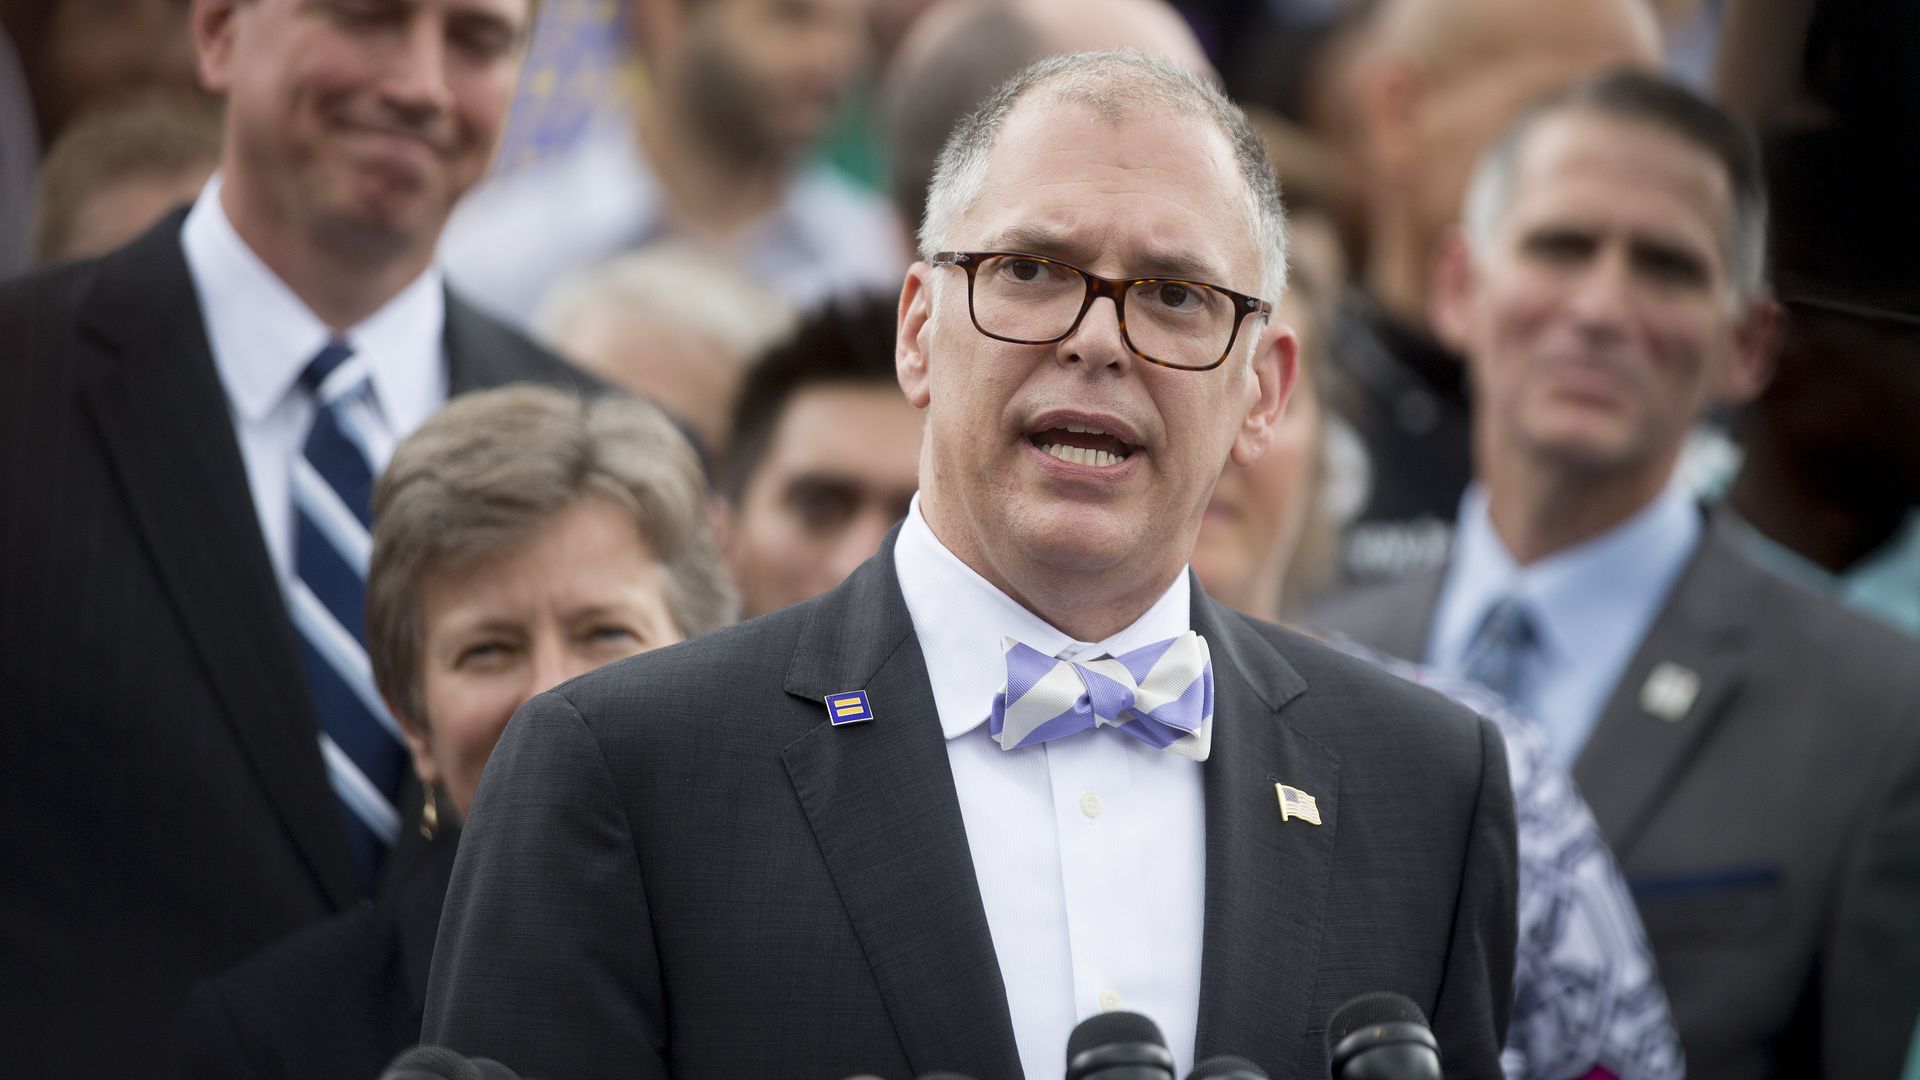 Jim Obergefell, the named plaintiff in the Obergefell v. Hodges case, speaking outside the Supreme Court in 2015.